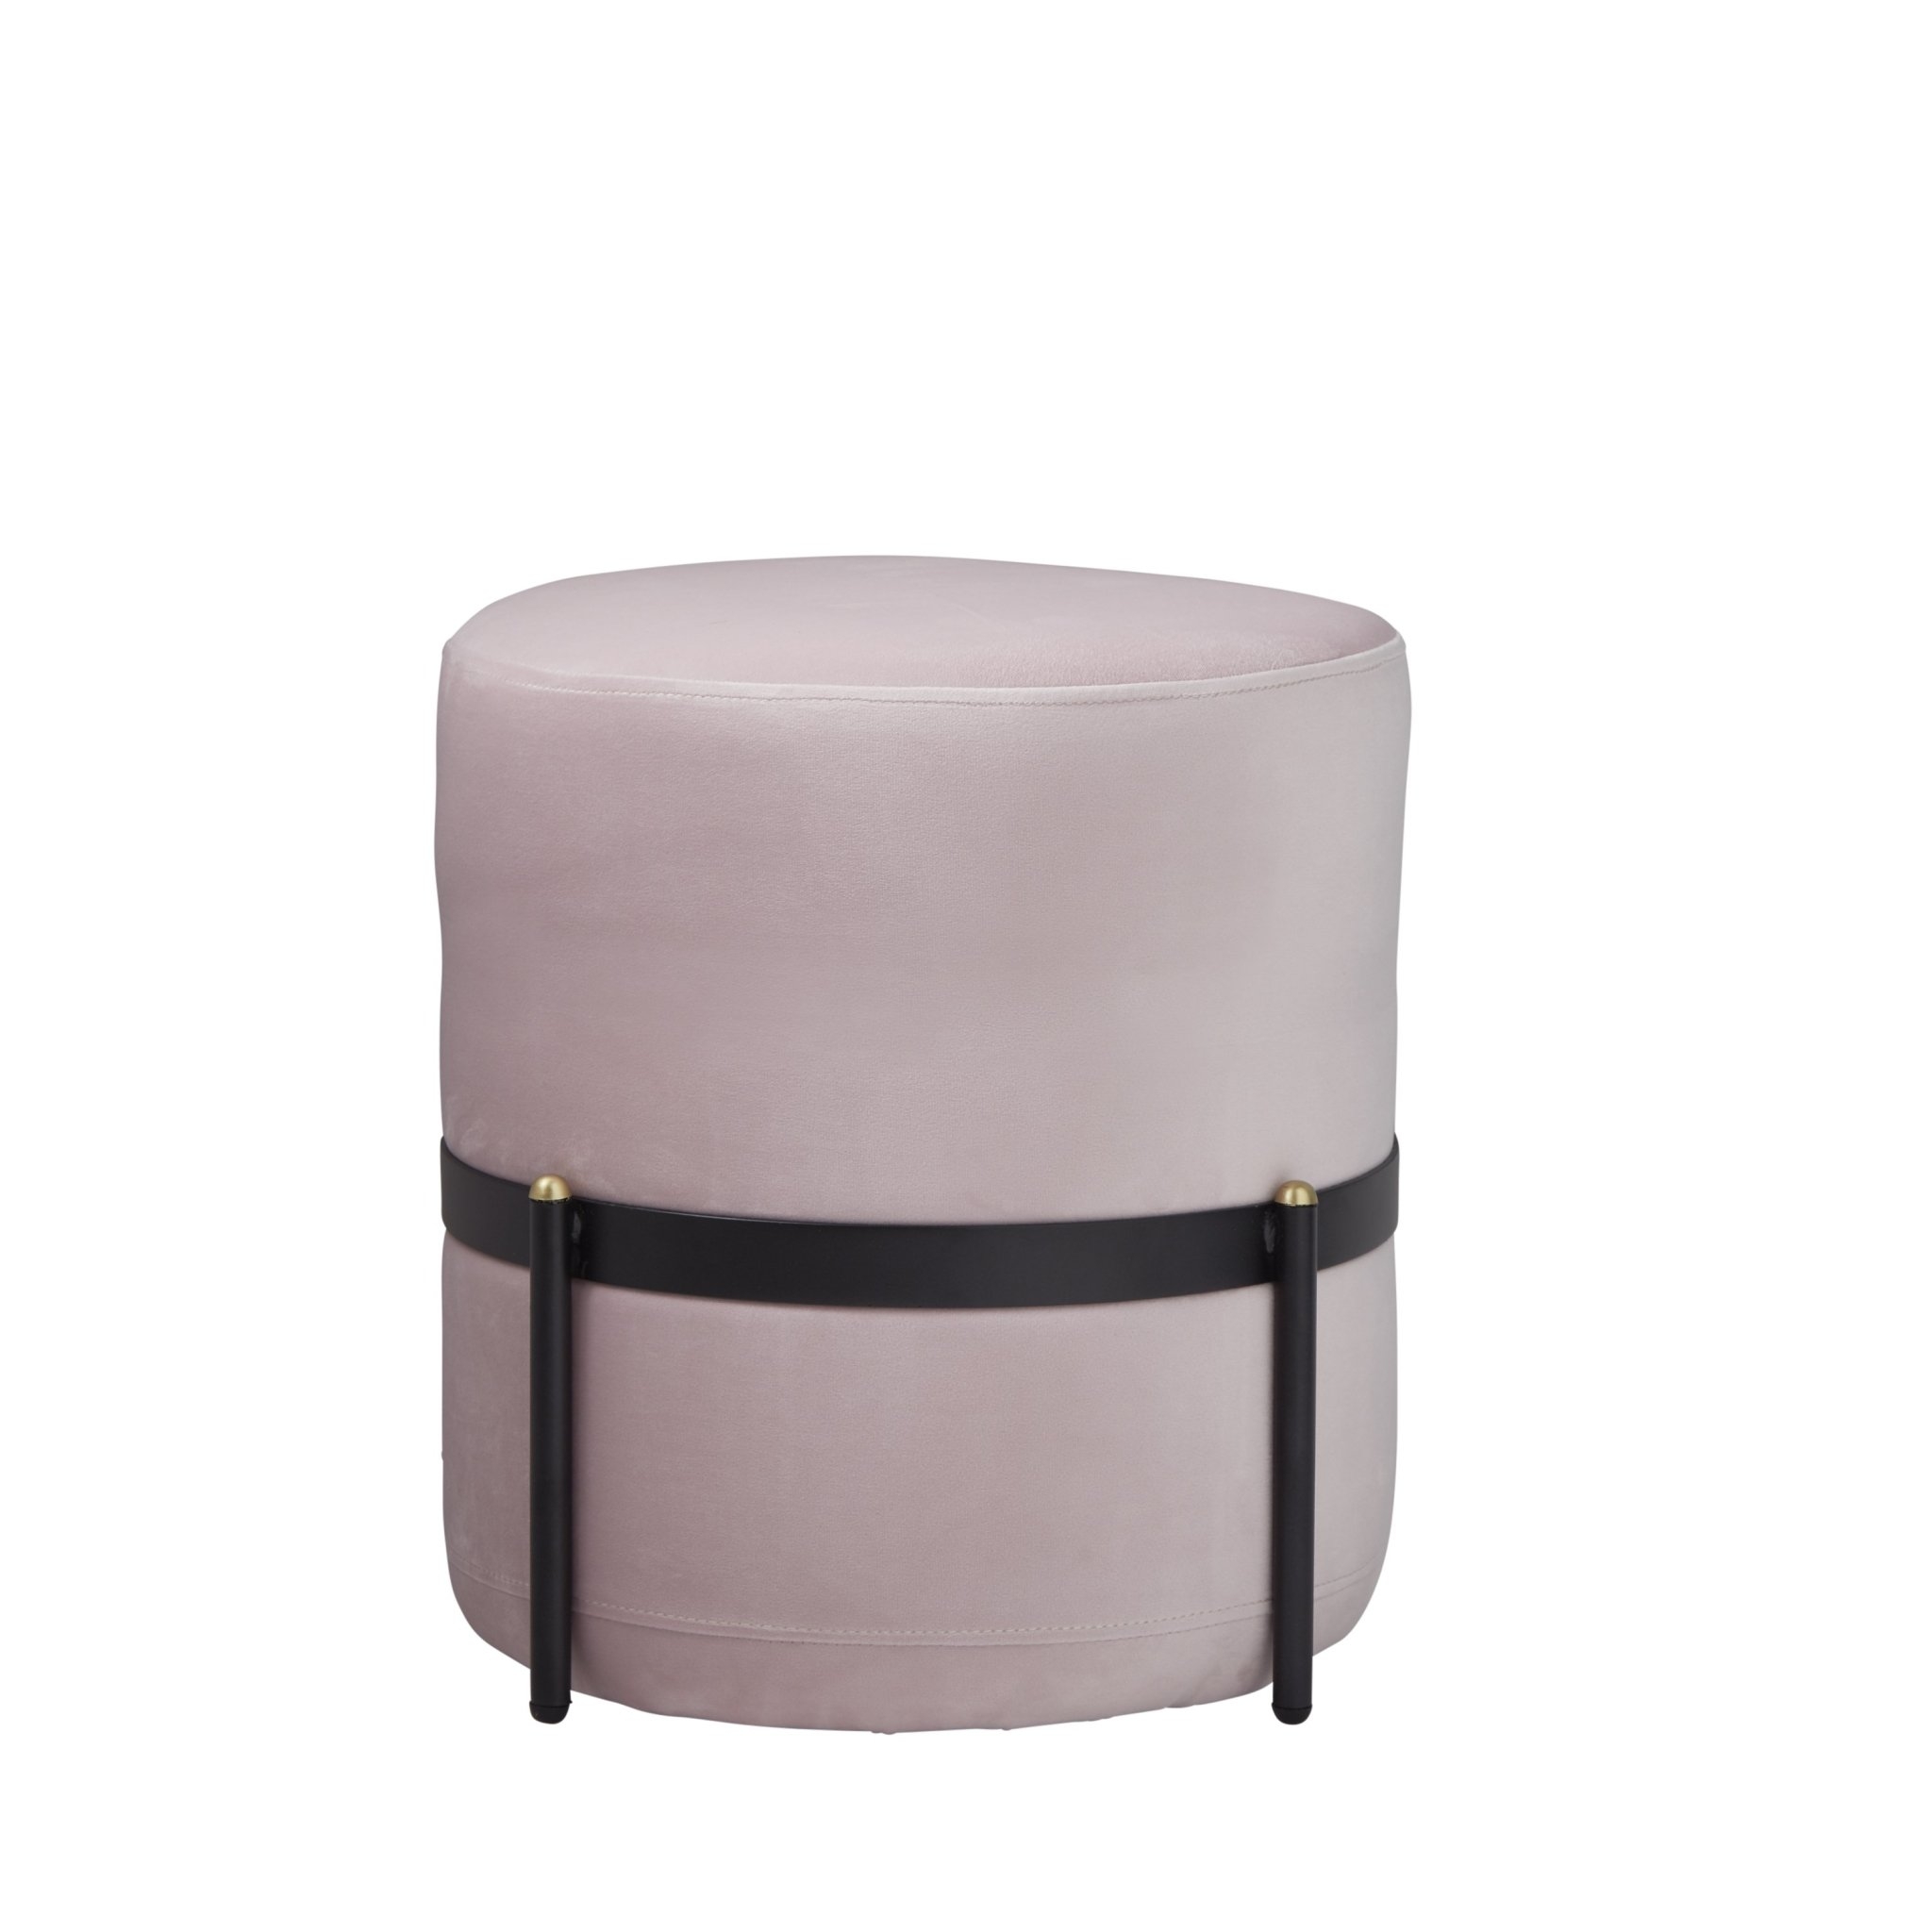 Native Home & Lifestyle Stool In Pale Pink With Stilts 40 x 40 x 40cm – Furniture & Homeware – The Luxe Home